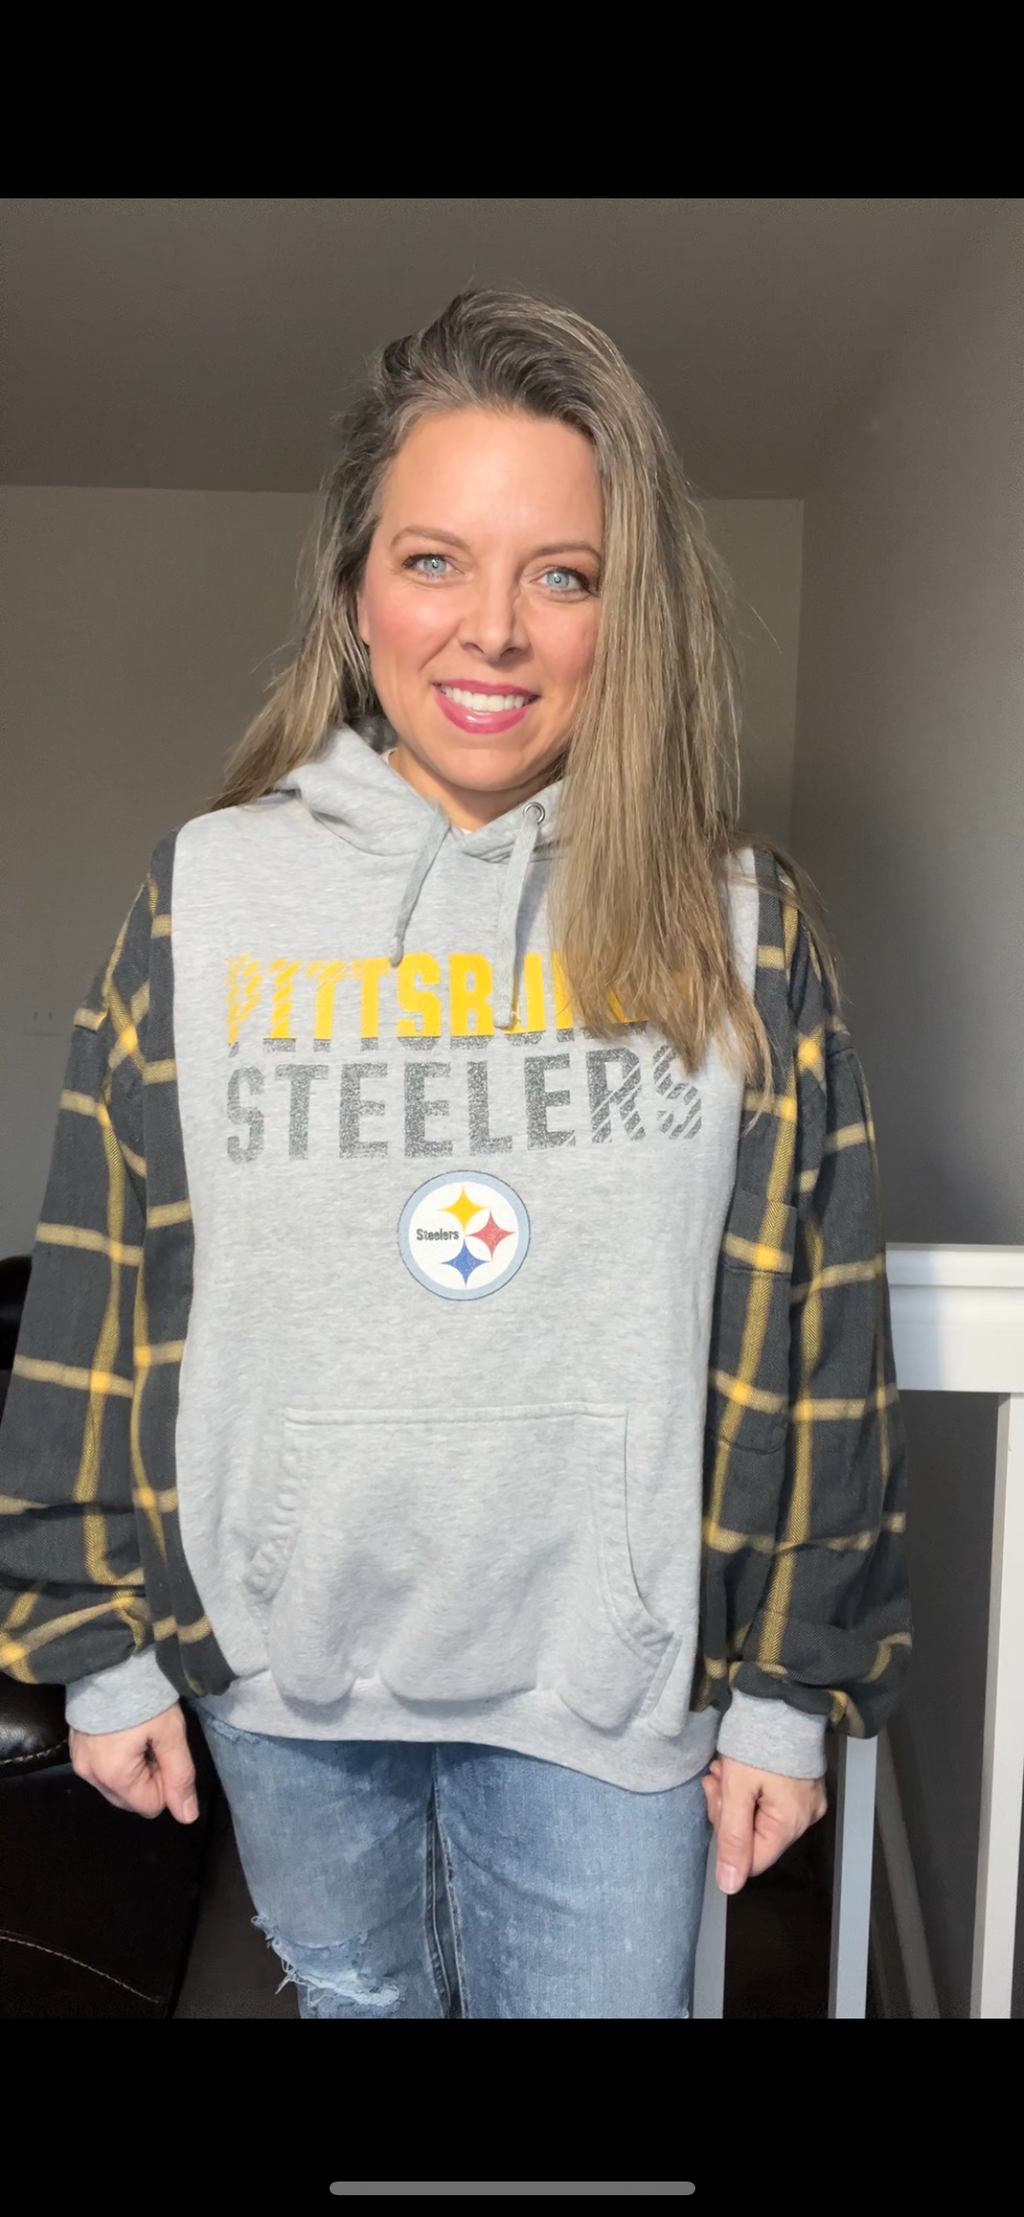 Upcycled Steelers – women’s L/XL – thick sweatshirt with flannel sleeves￼